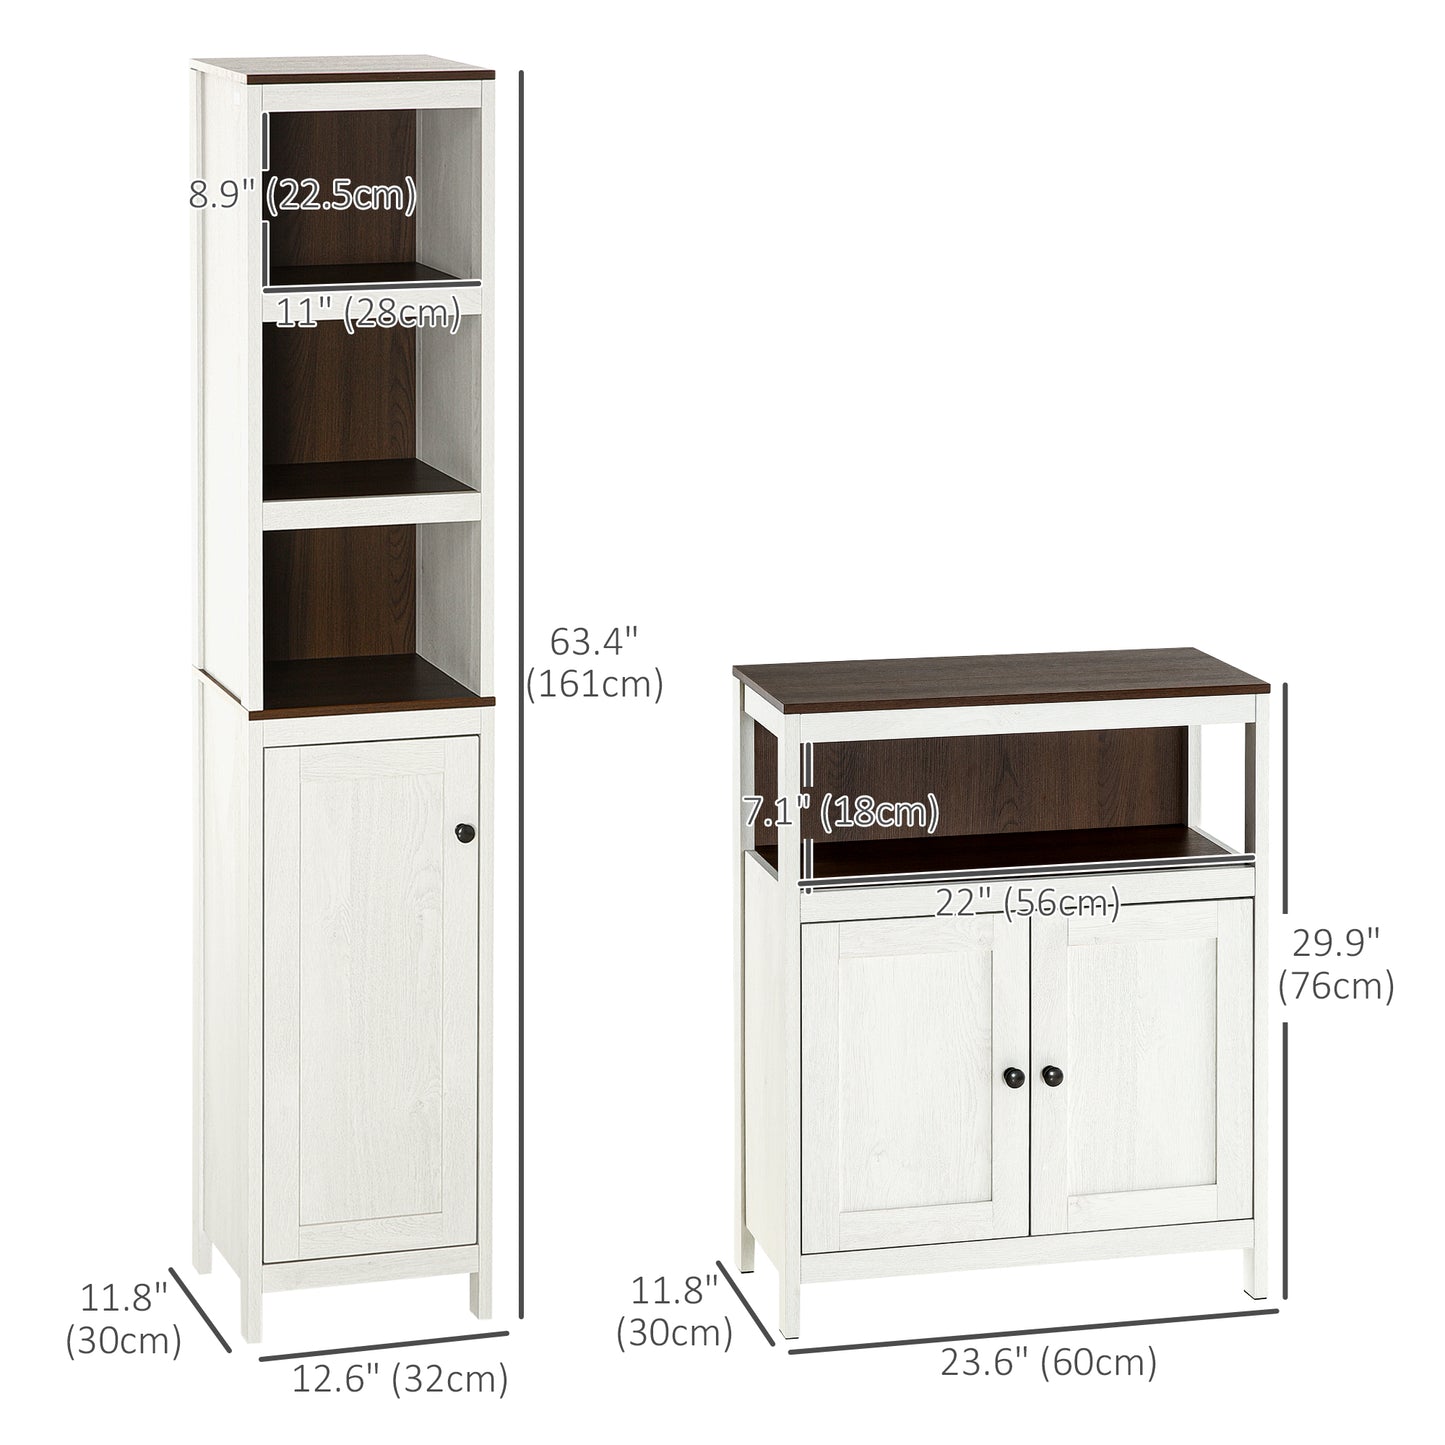 2-Piece Bathroom Furniture Set, Slim Bathroom Storage Cabinets with Doors and Shelves, Tall Bathroom Linen Tower and Small Bathroom Floor Cabinet, White